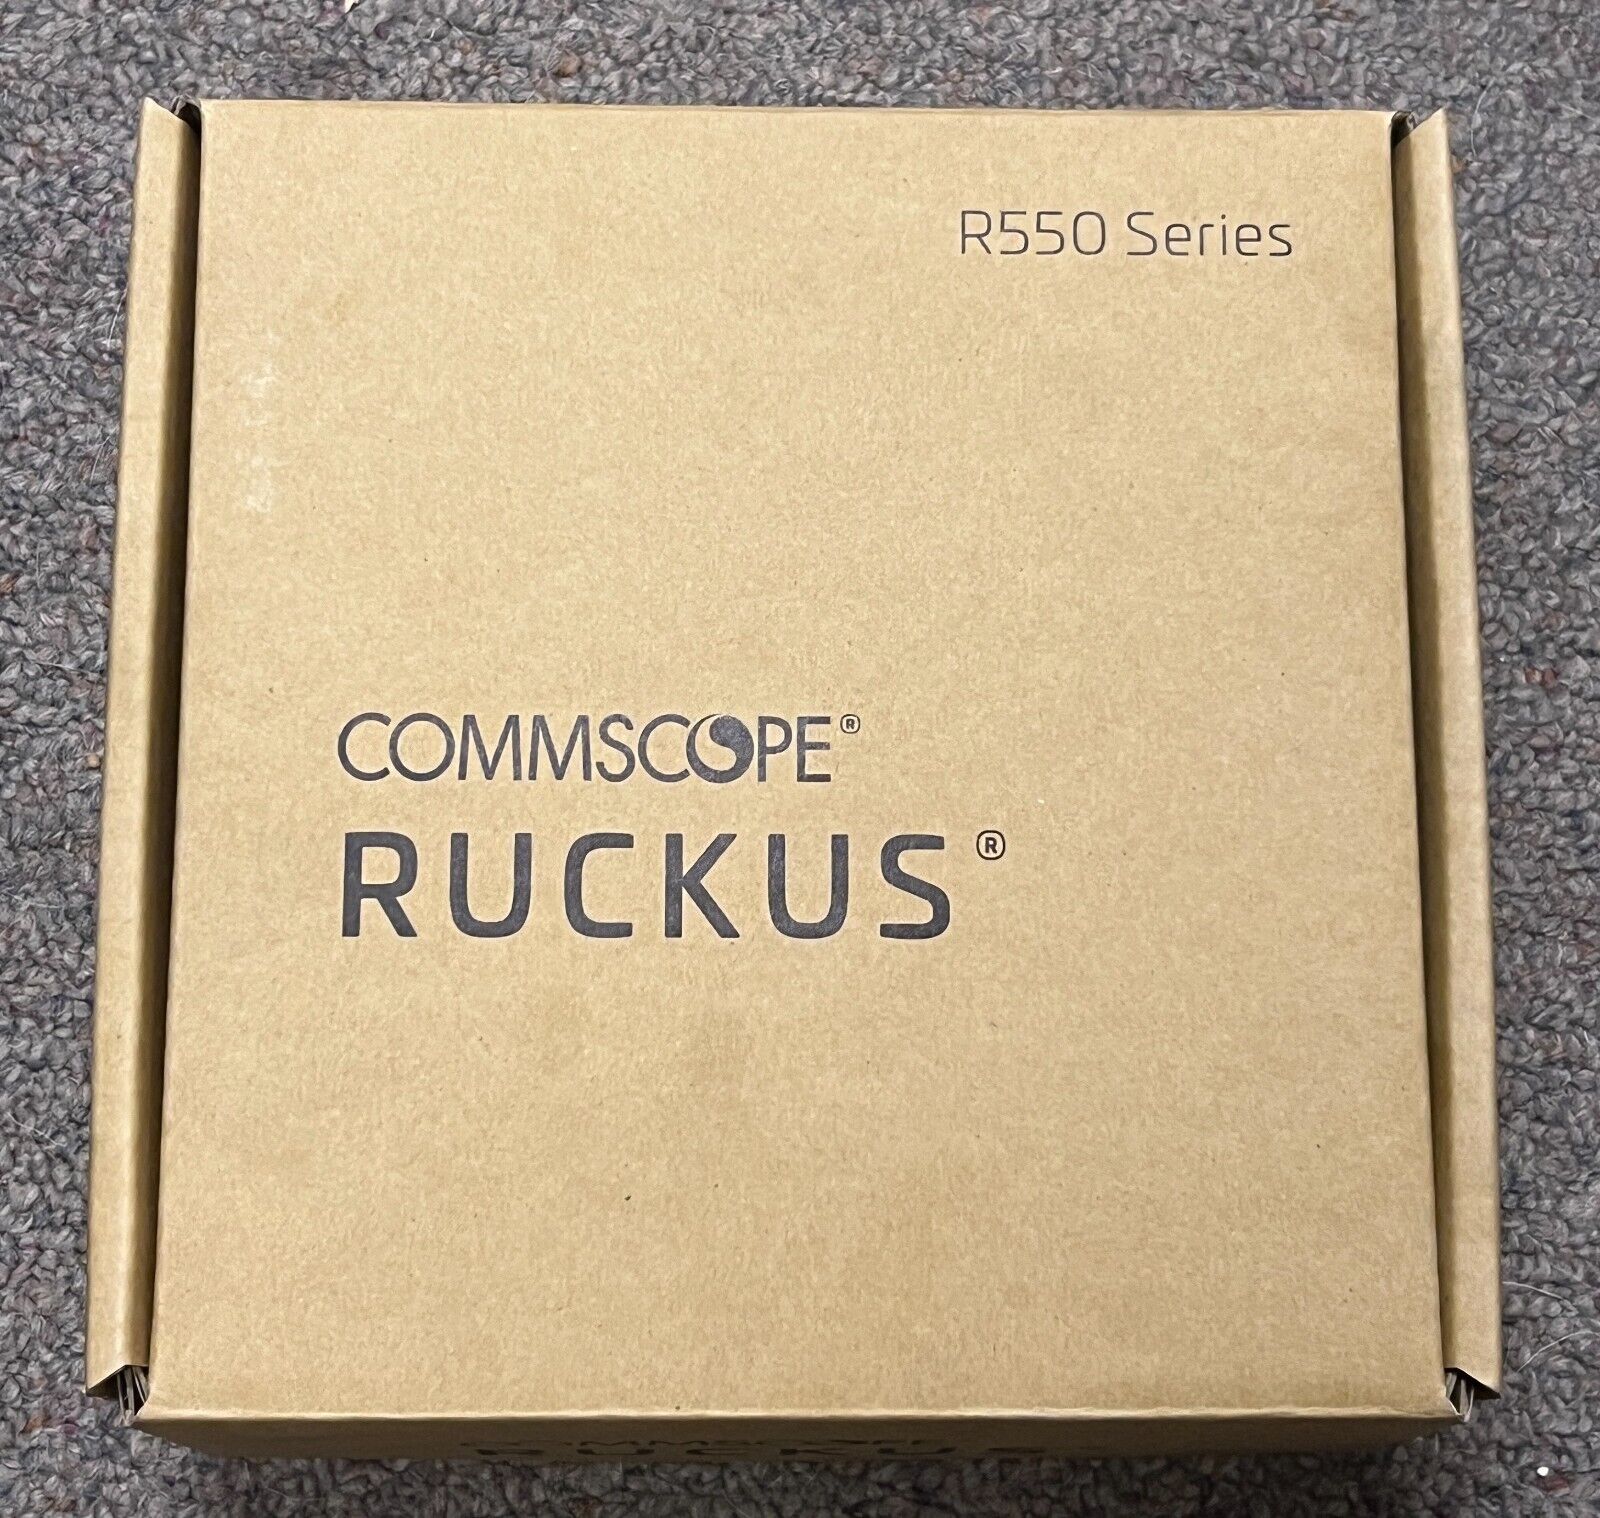 (BOX OF 12) RUCKUS R550 Series Dual-Band Wi-Fi Access Point 901-R550-US00 NEW